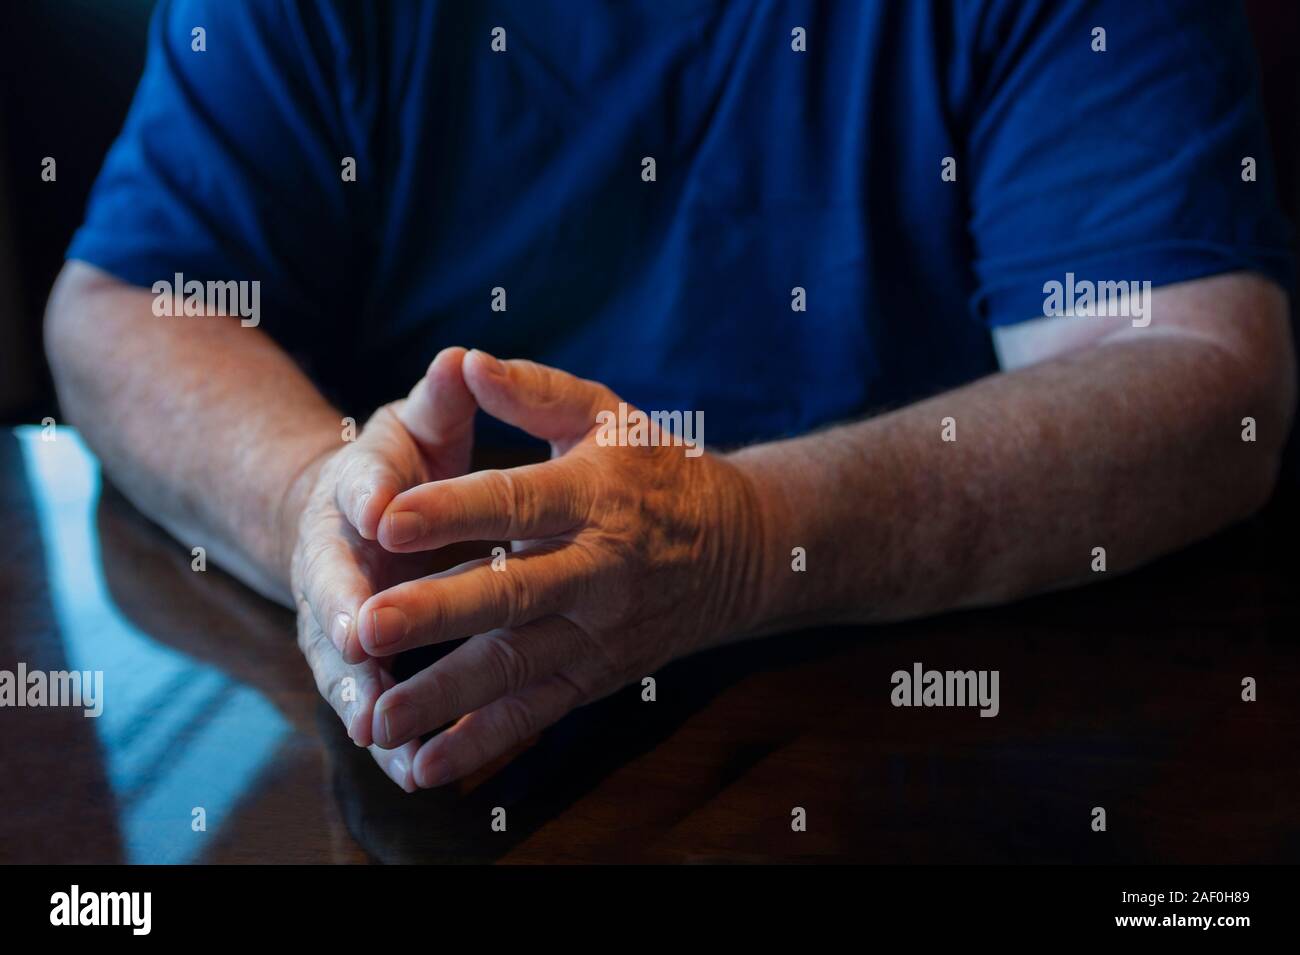 man communicating with hand gestures Stock Photo